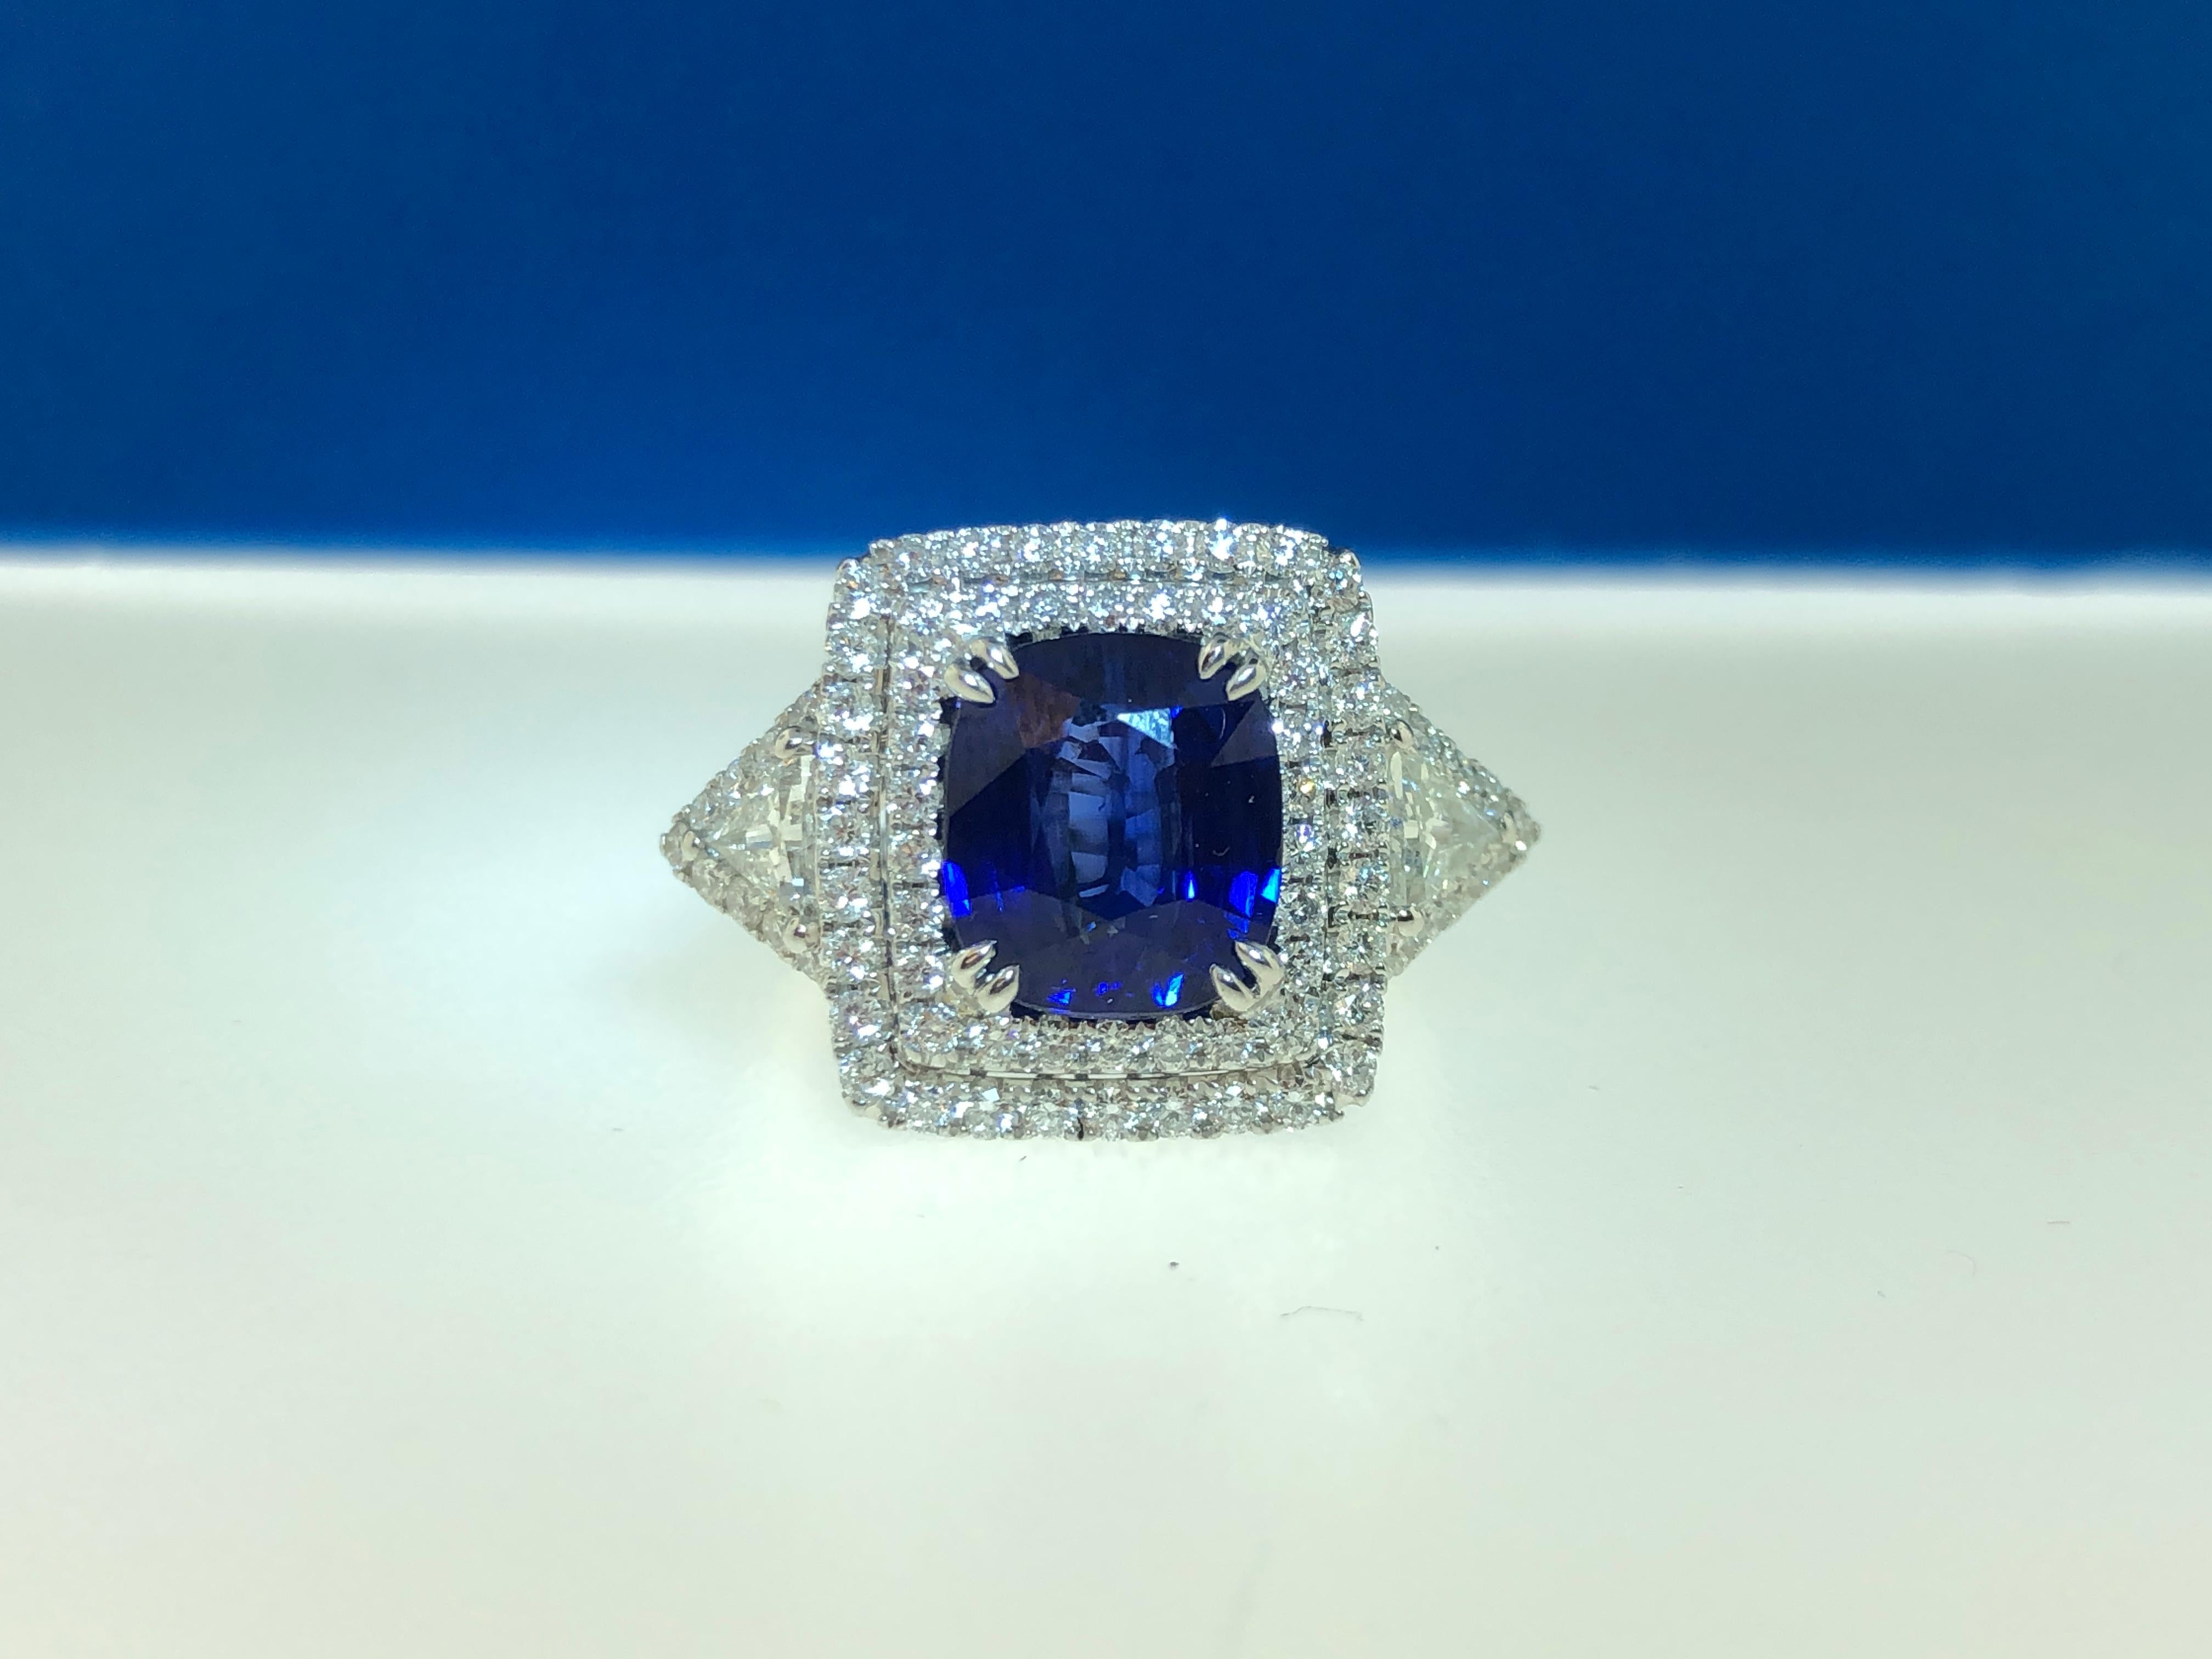 This stunning cocktail ring features a GIA Certified 4.04 carat beautiful blue cushion sapphire with a double diamond halo. The sapphire is flanked by trillion cut diamond side stones, each with its own diamond halo. Total diamond weight = 1.39